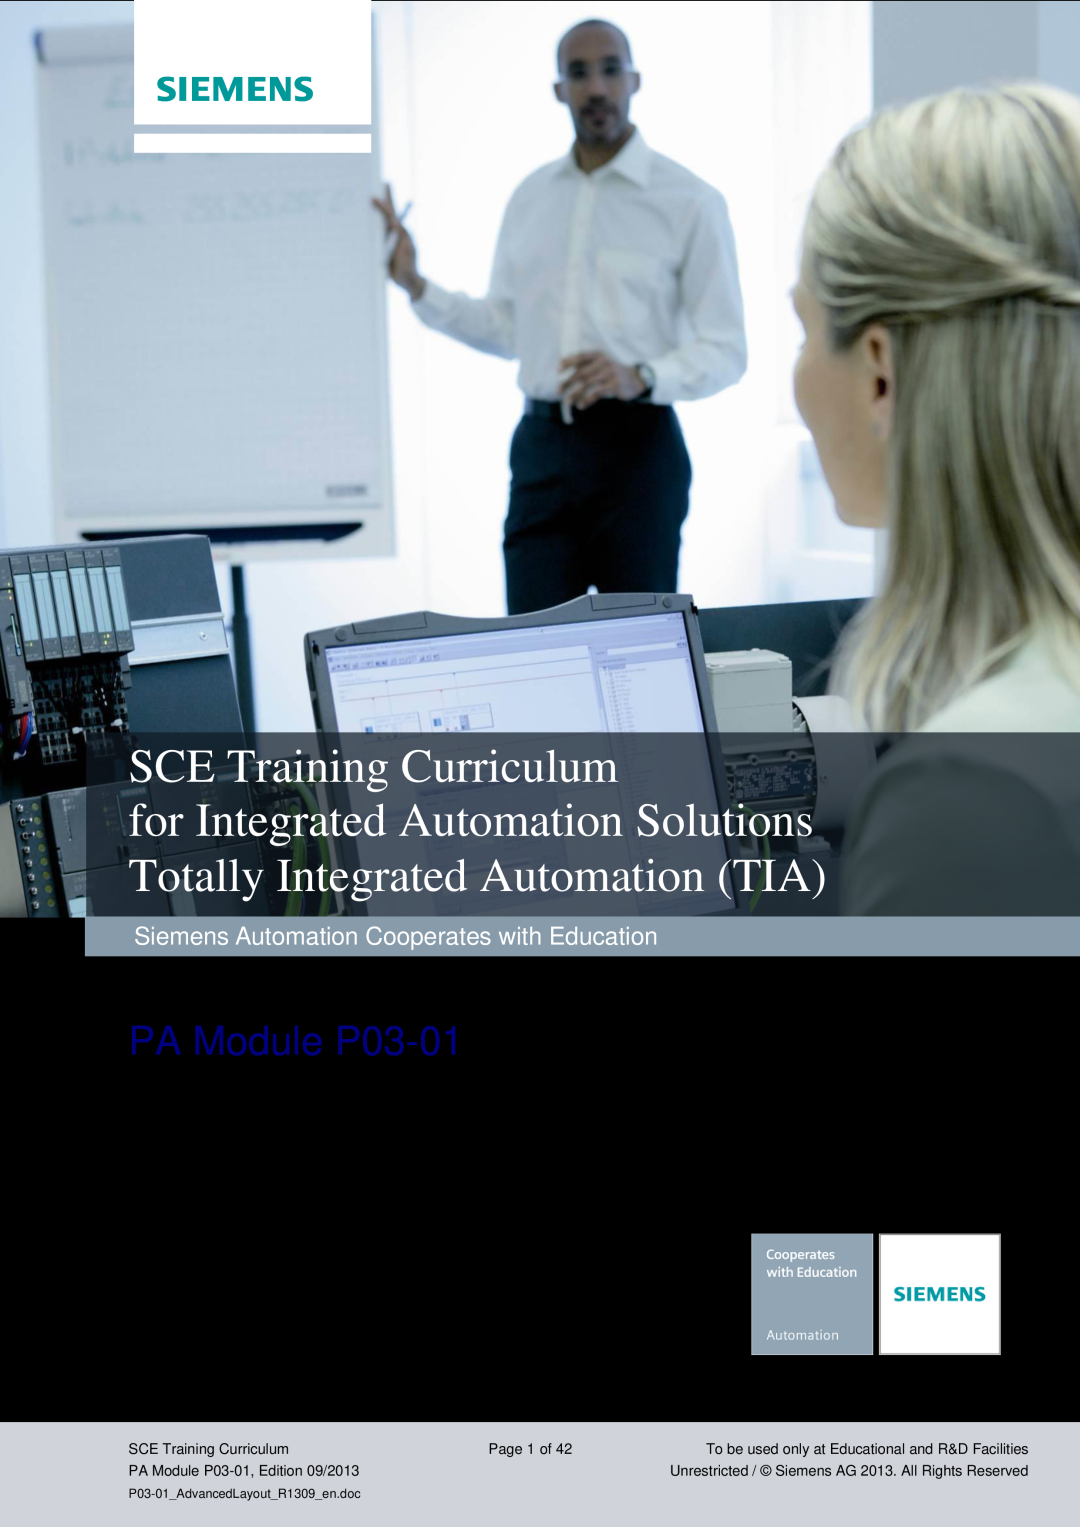 Siemens pa module p03-01 manual Industry Sector, IA&DT, SCE Training Curriculum, PA Module P03-01, Page 1 of 